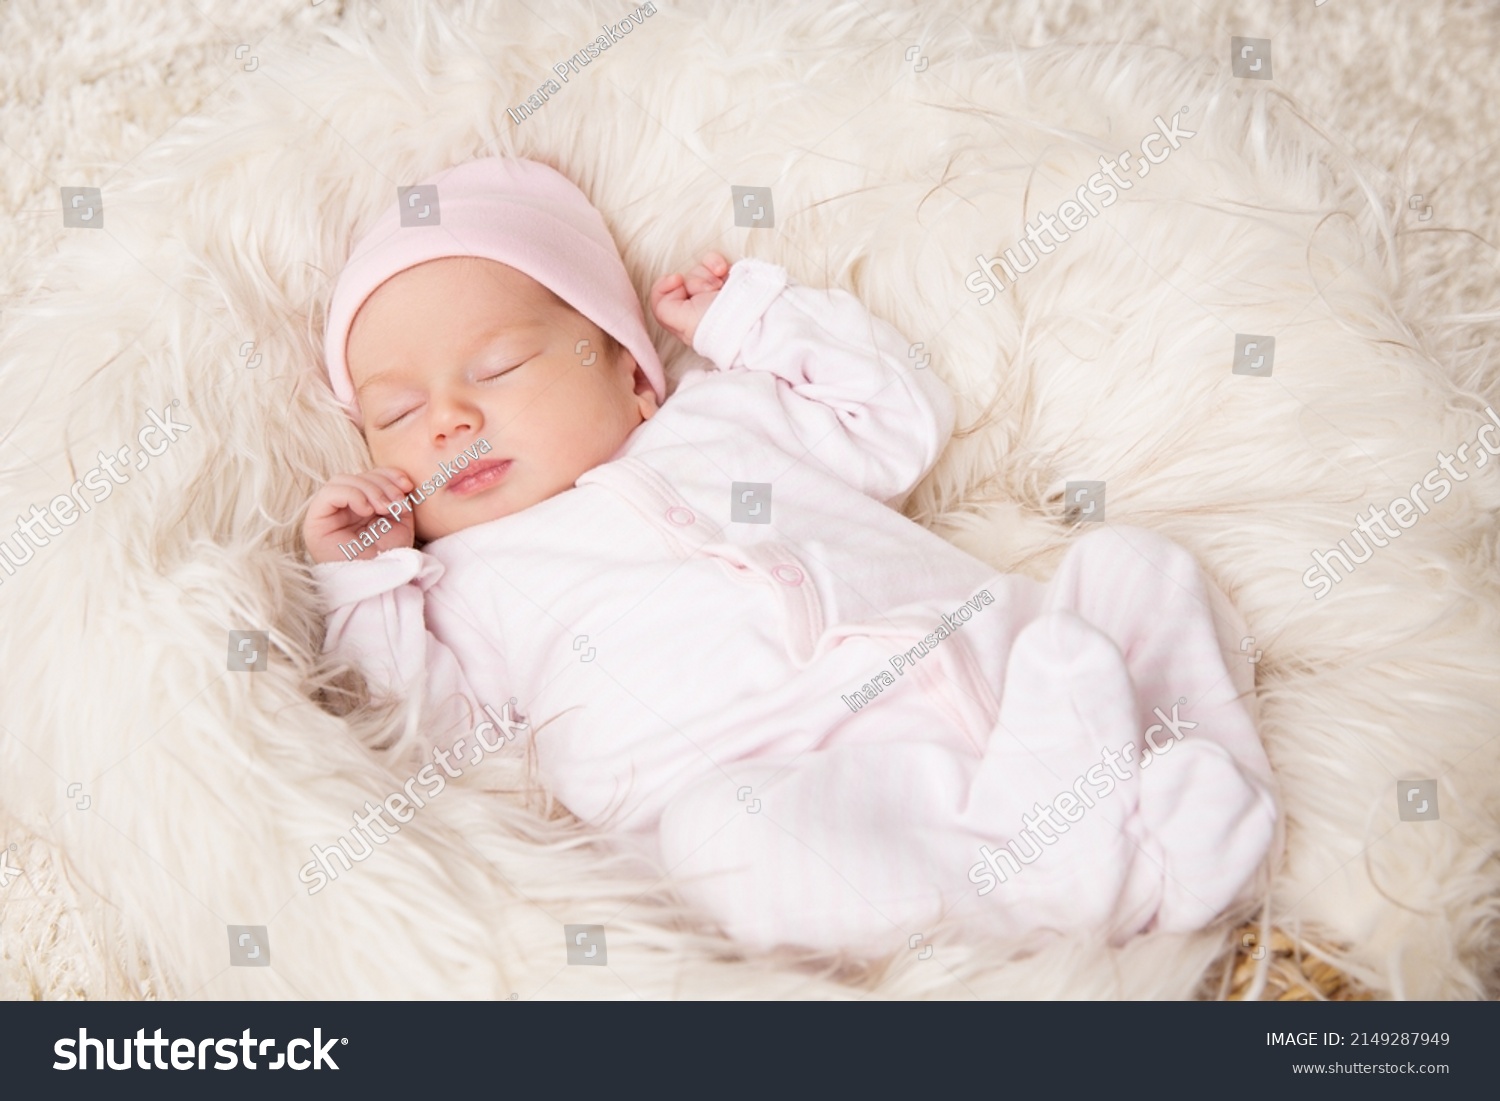 Newborn Baby Girl sleeping over Fluffy White Blanket. Adorable One Month Child in Pink Bodysuit dreaming over Beige Furry Carpet. Cute New Born Kid relax #2149287949